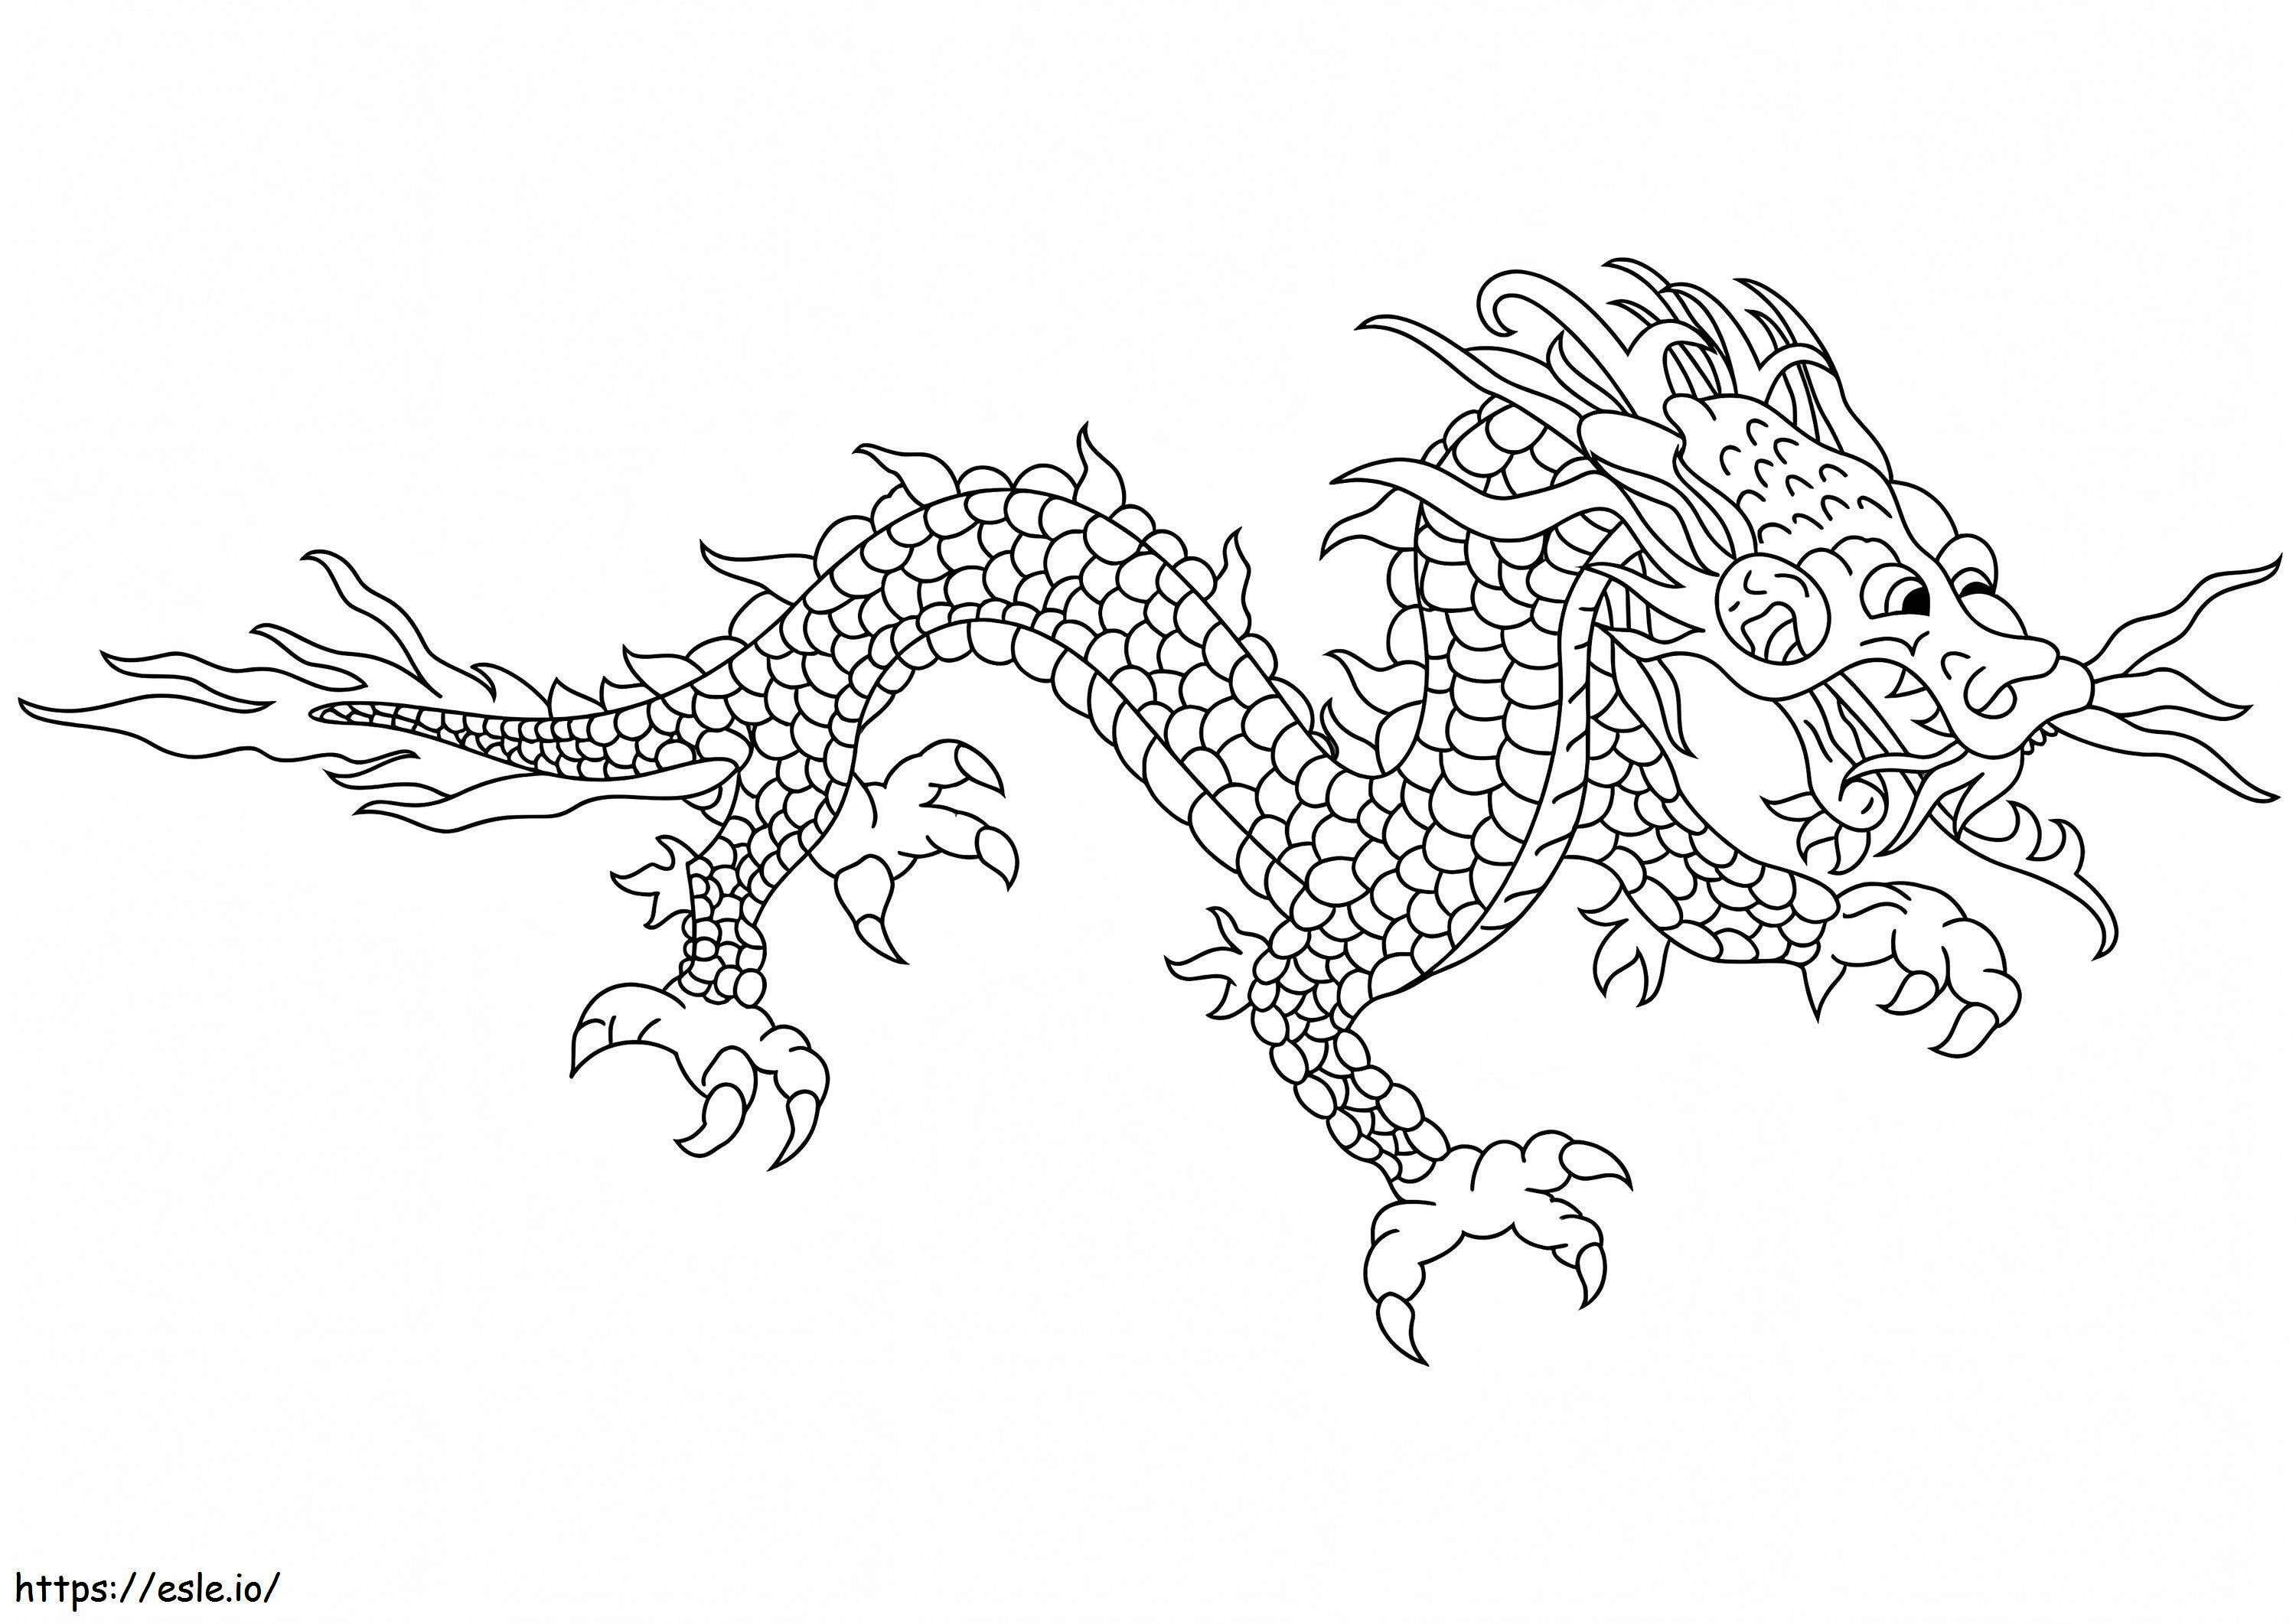 Asian Dragon coloring page